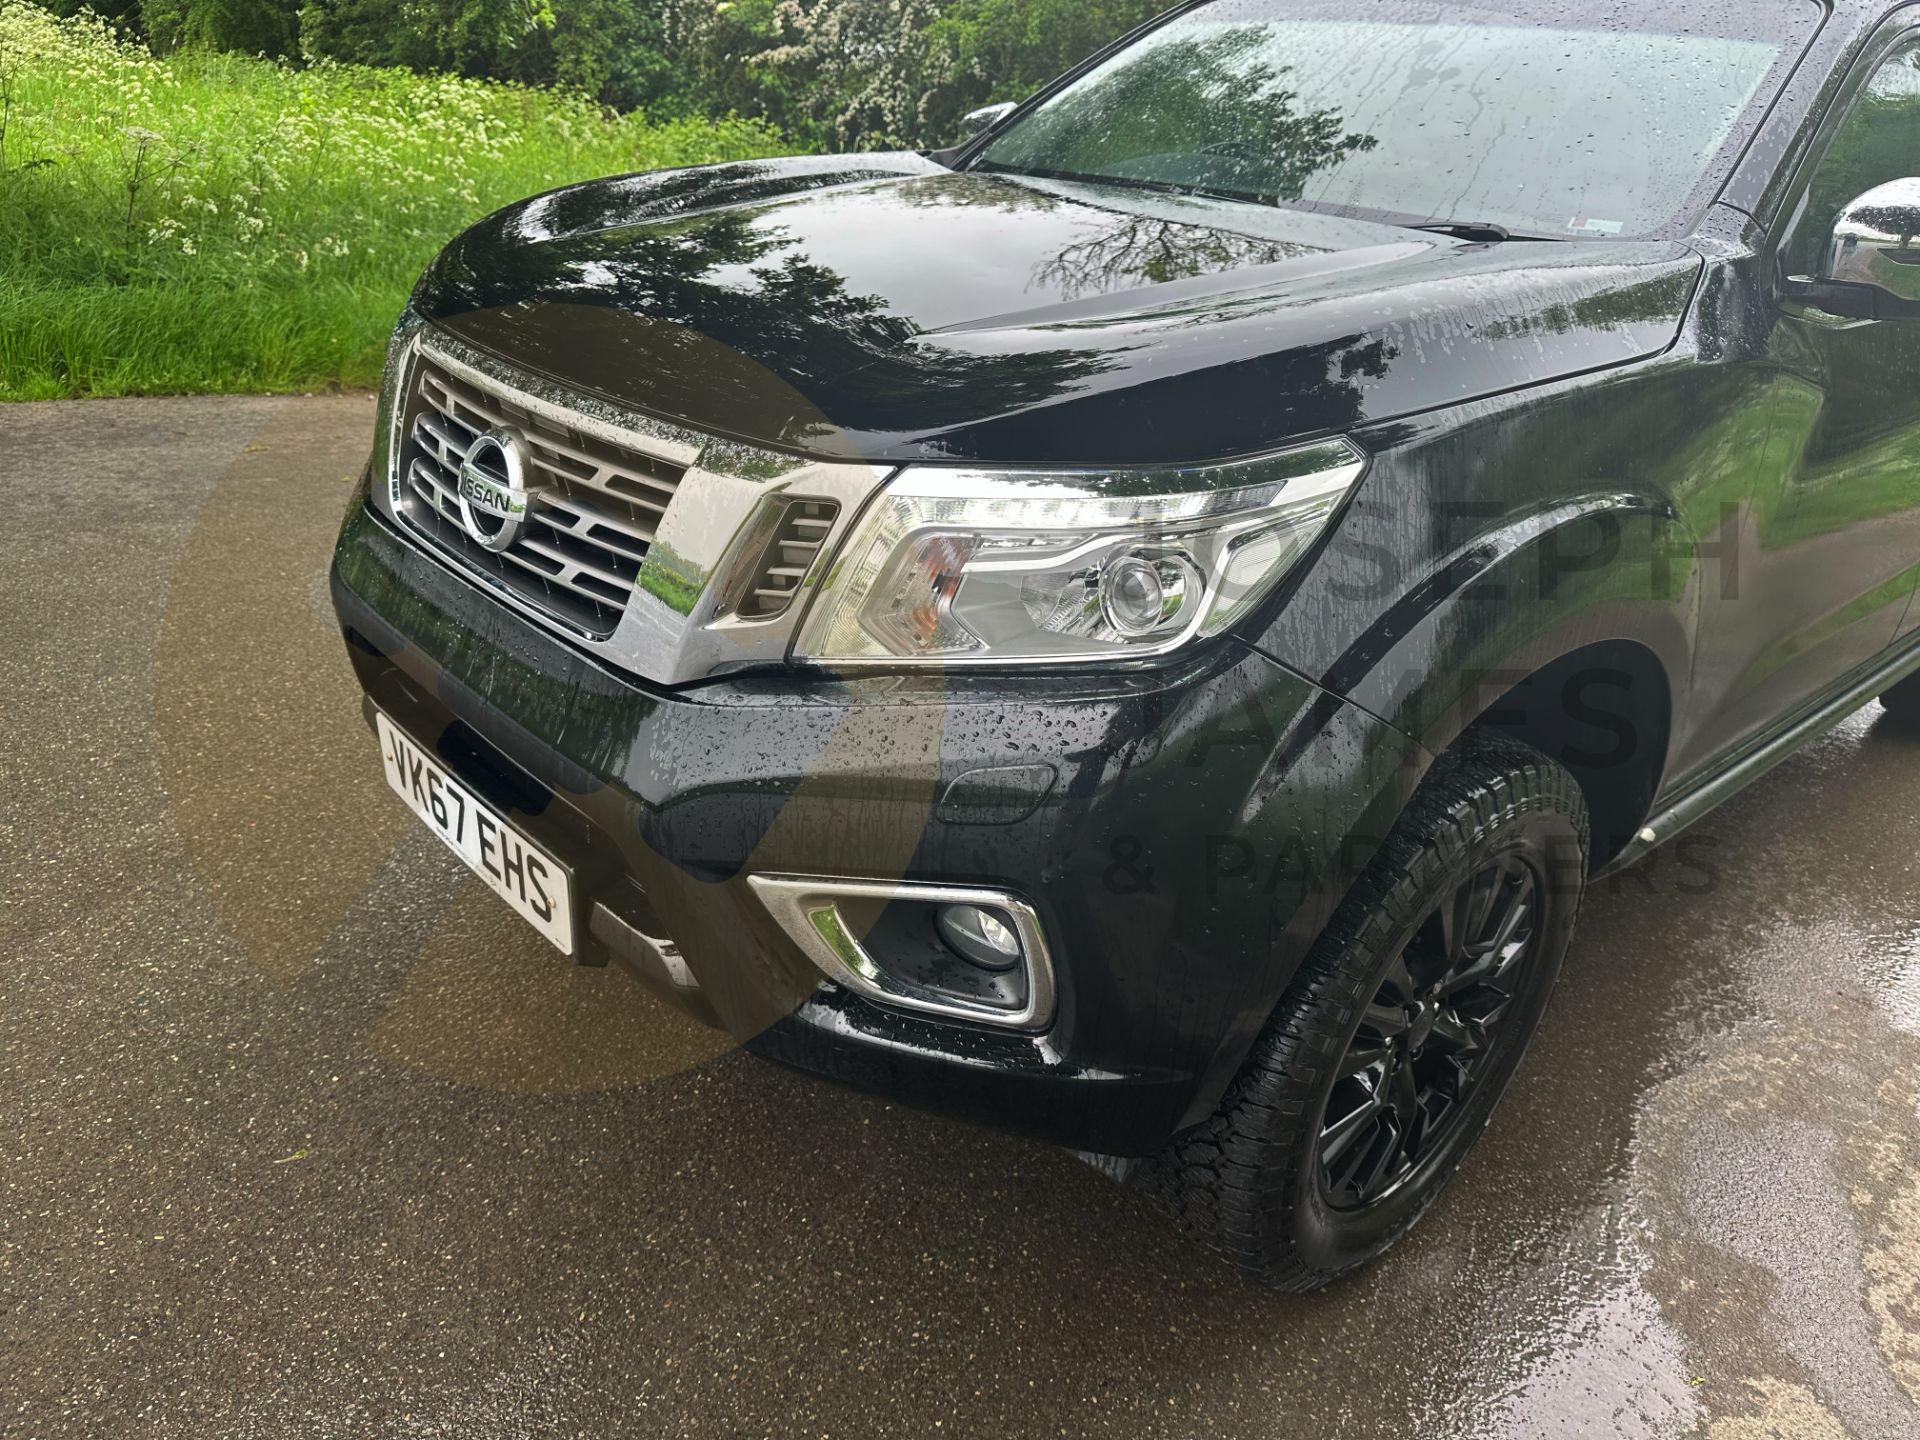 (ON SALE) NISSAN NAVARA *TREK-1 EDITION* DOUBLE CAB PICK-UP (2018 - EURO 6) 2.3 DCI - AUTOMATIC - Image 19 of 52